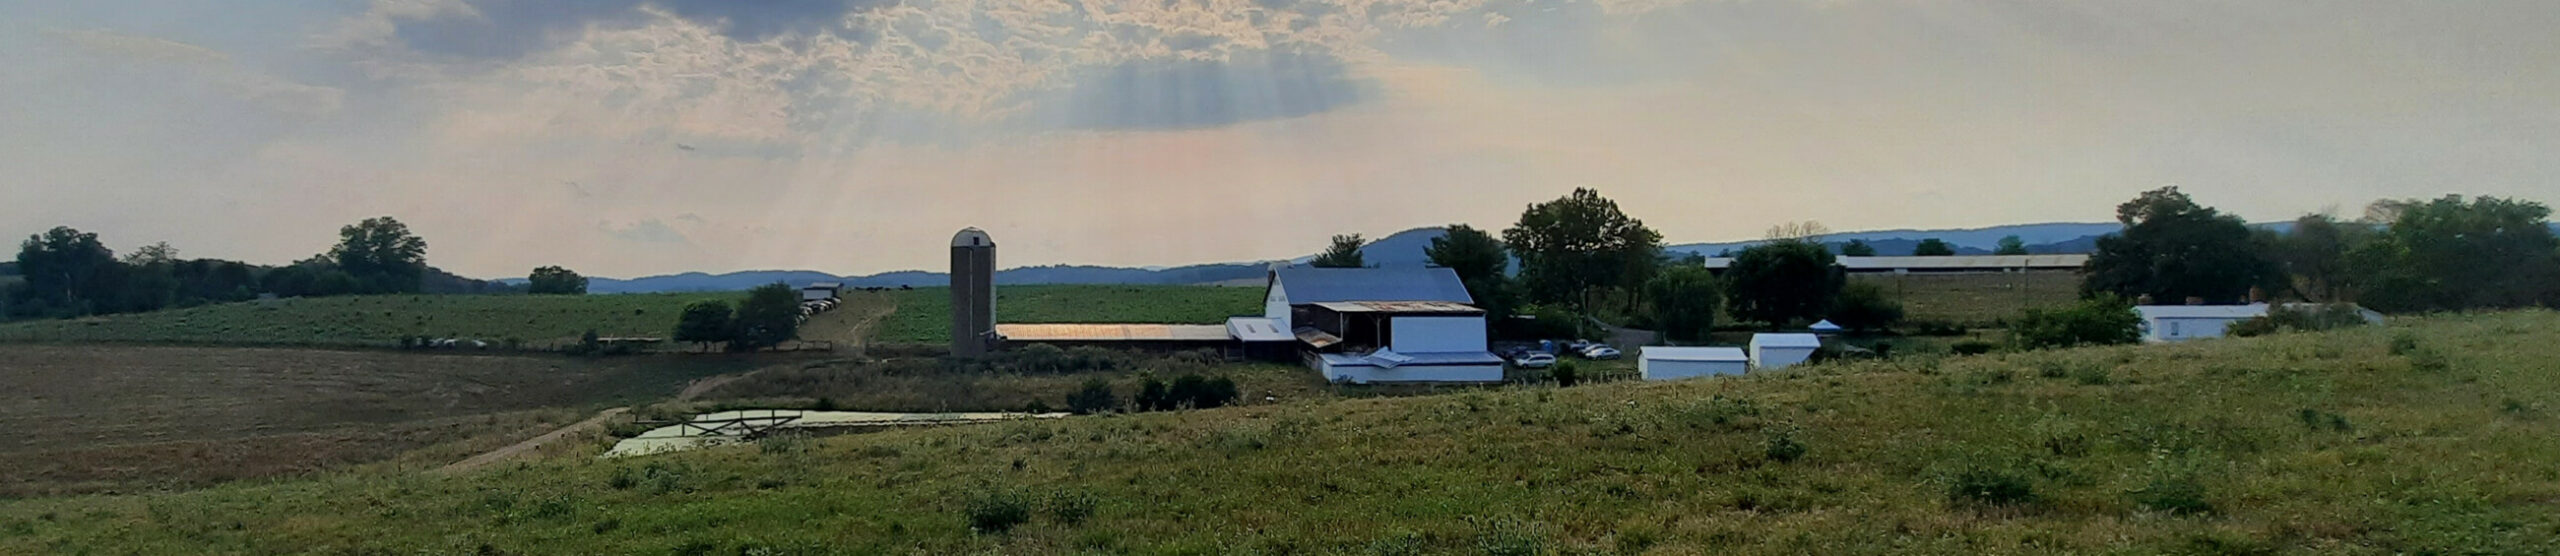 Farm landscape in a mid-summer afternoon under a cloudy sky with sunbeams shining through reflecting off the barn and farmhouse roof.